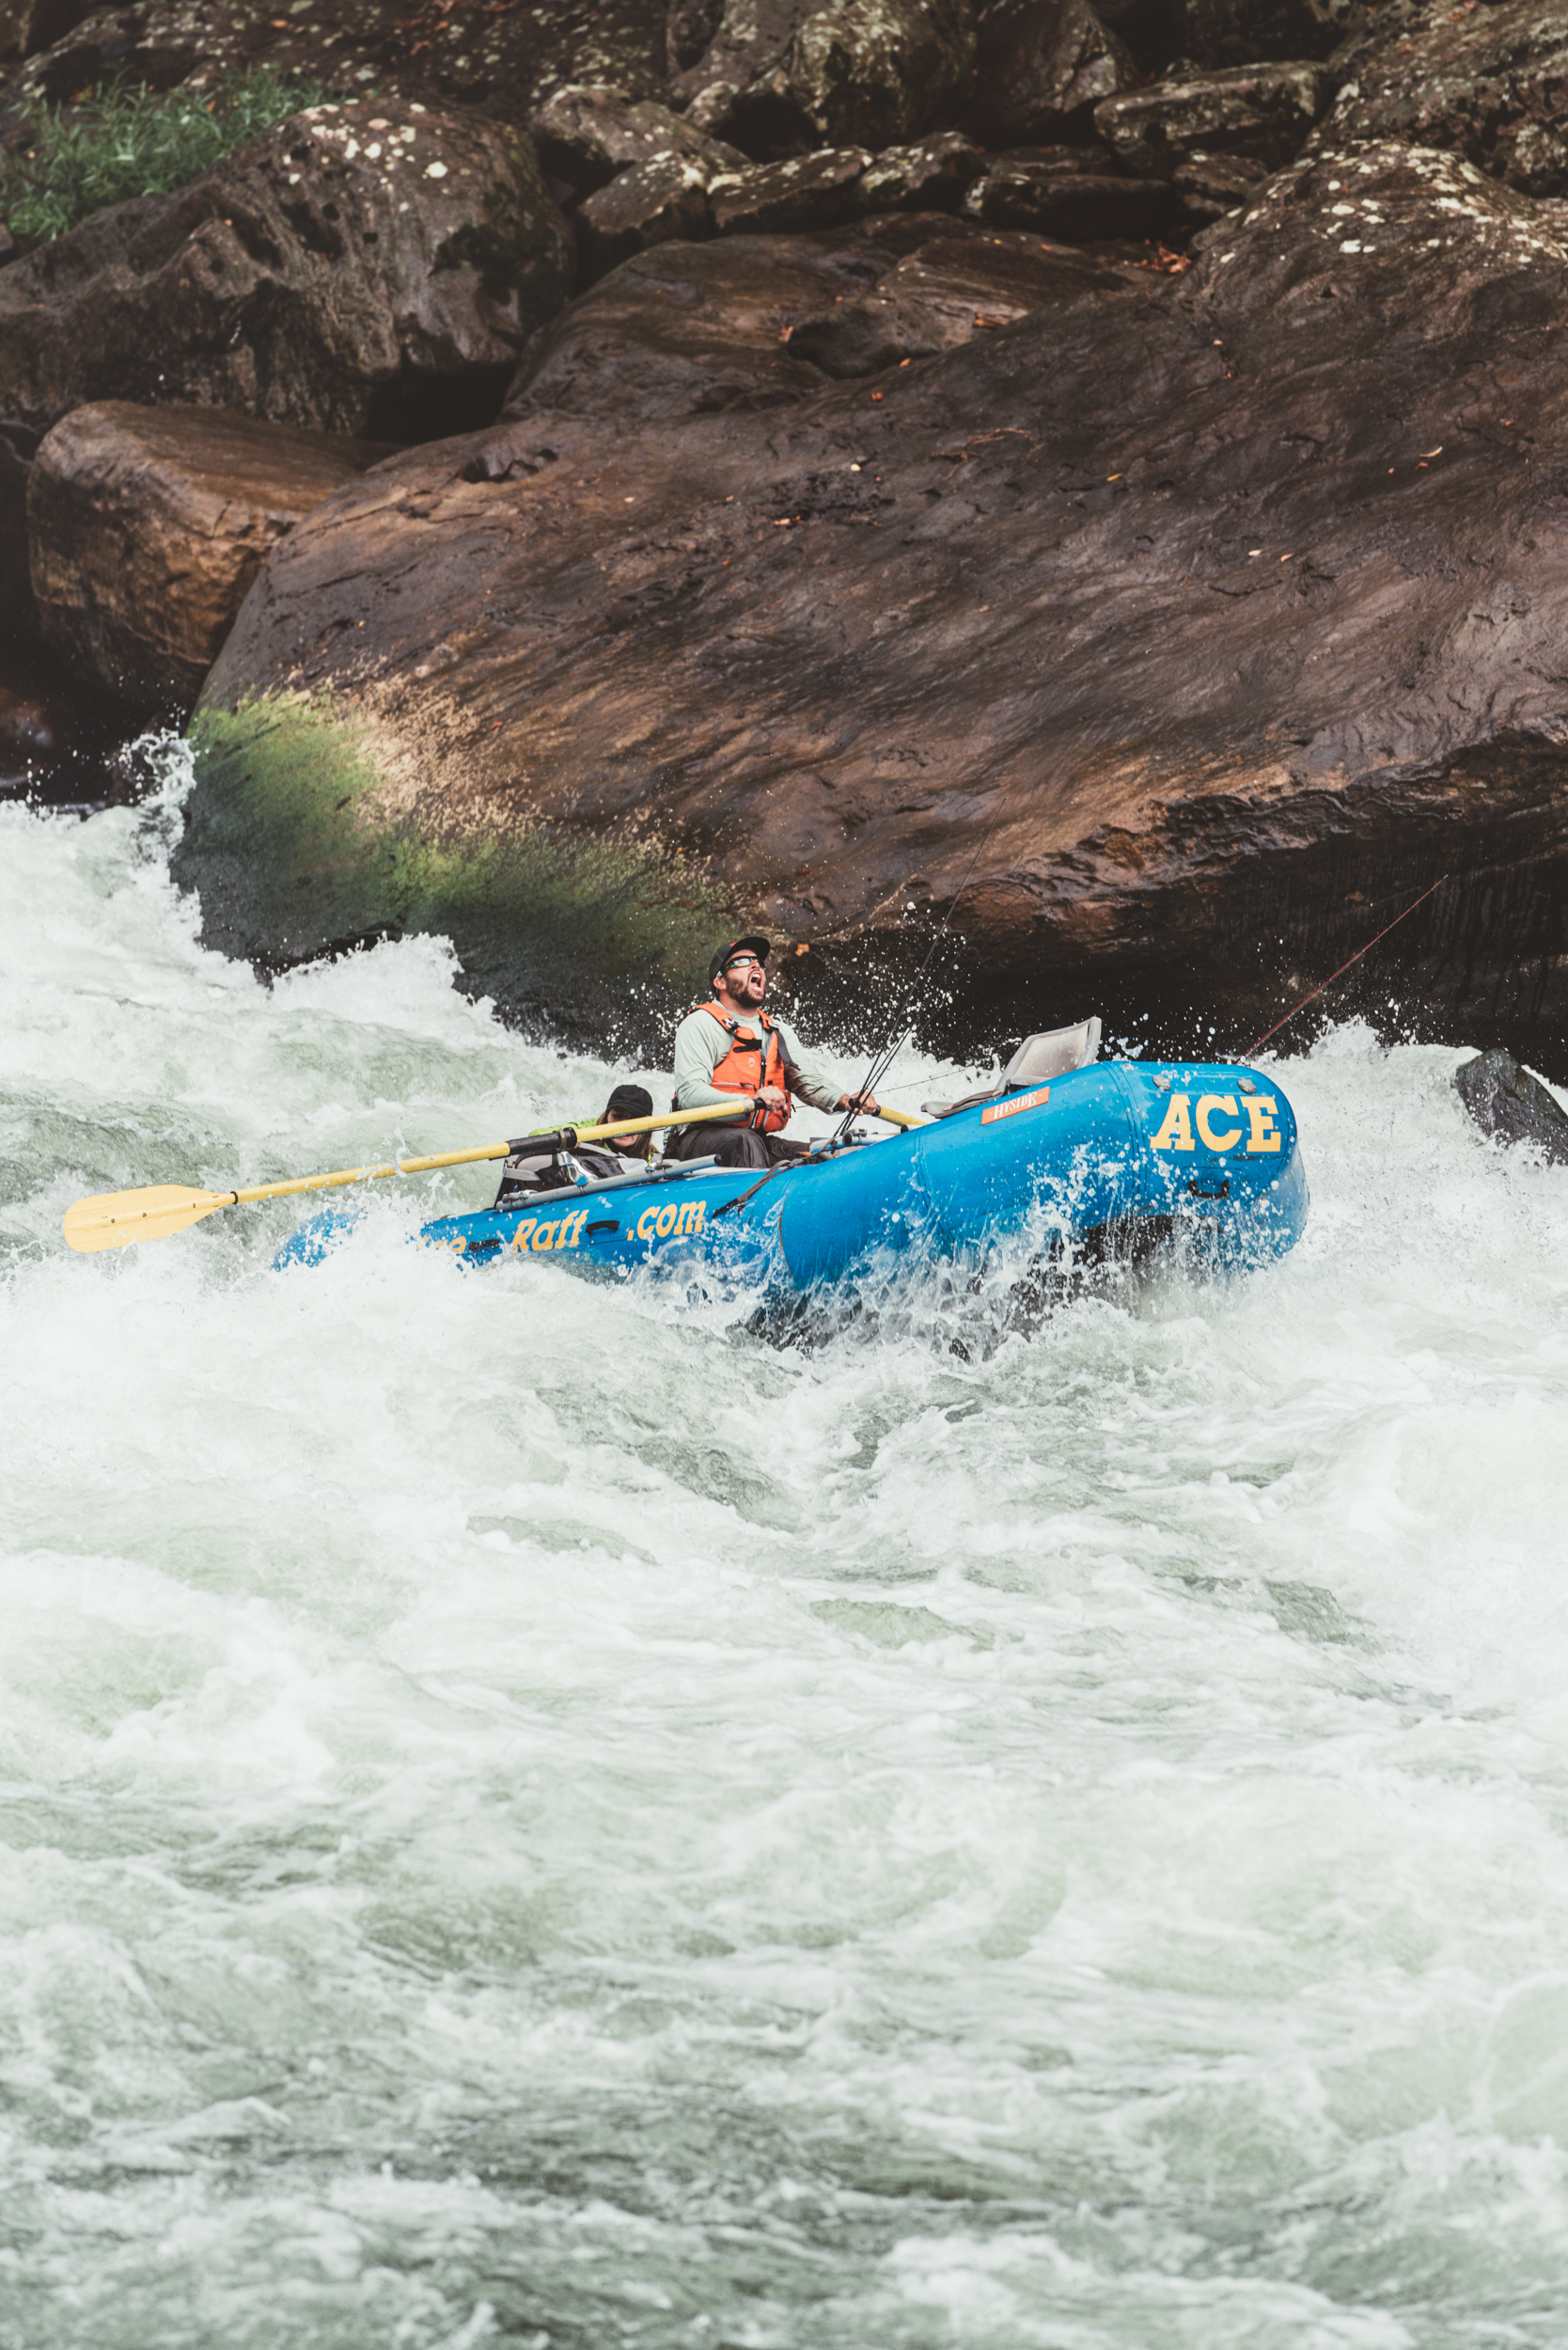 A fishing and rafting guide bombing down a rapid in an oar raft.